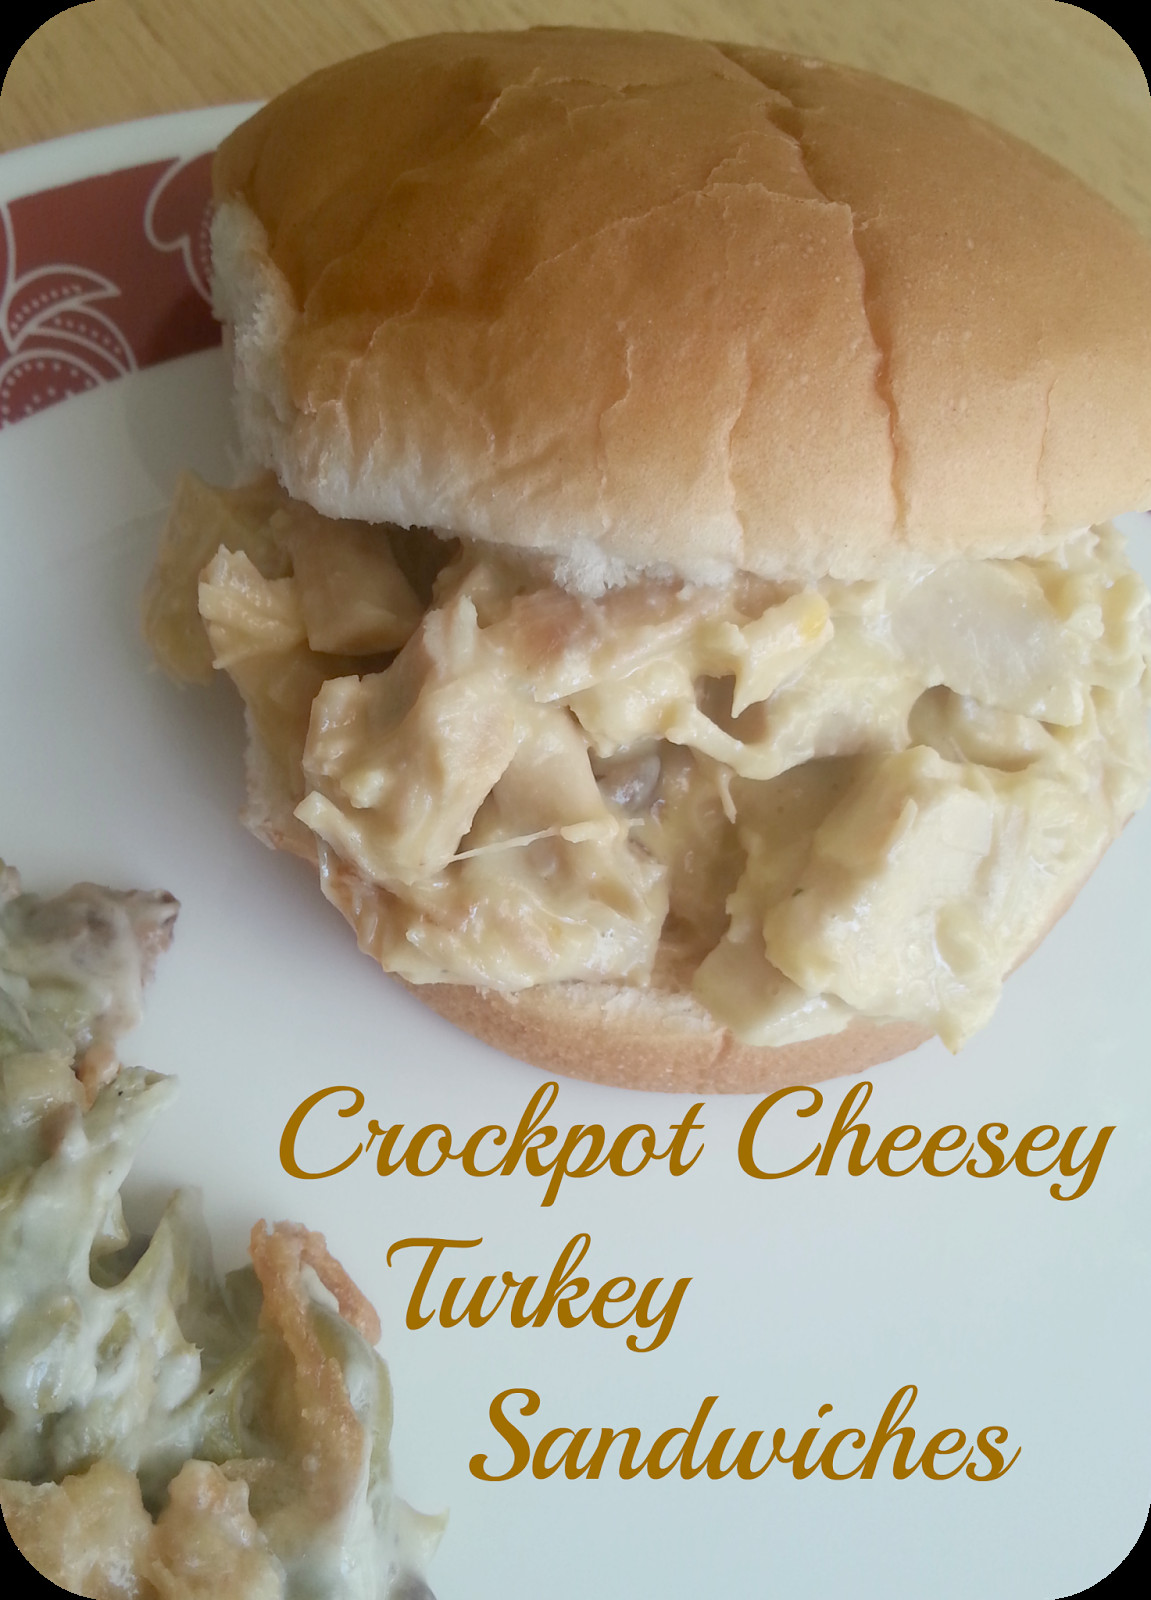 Hot Turkey Sandwiches For A Crowd
 The Better Baker Crockpot Cheesey Turkey Sandwiches